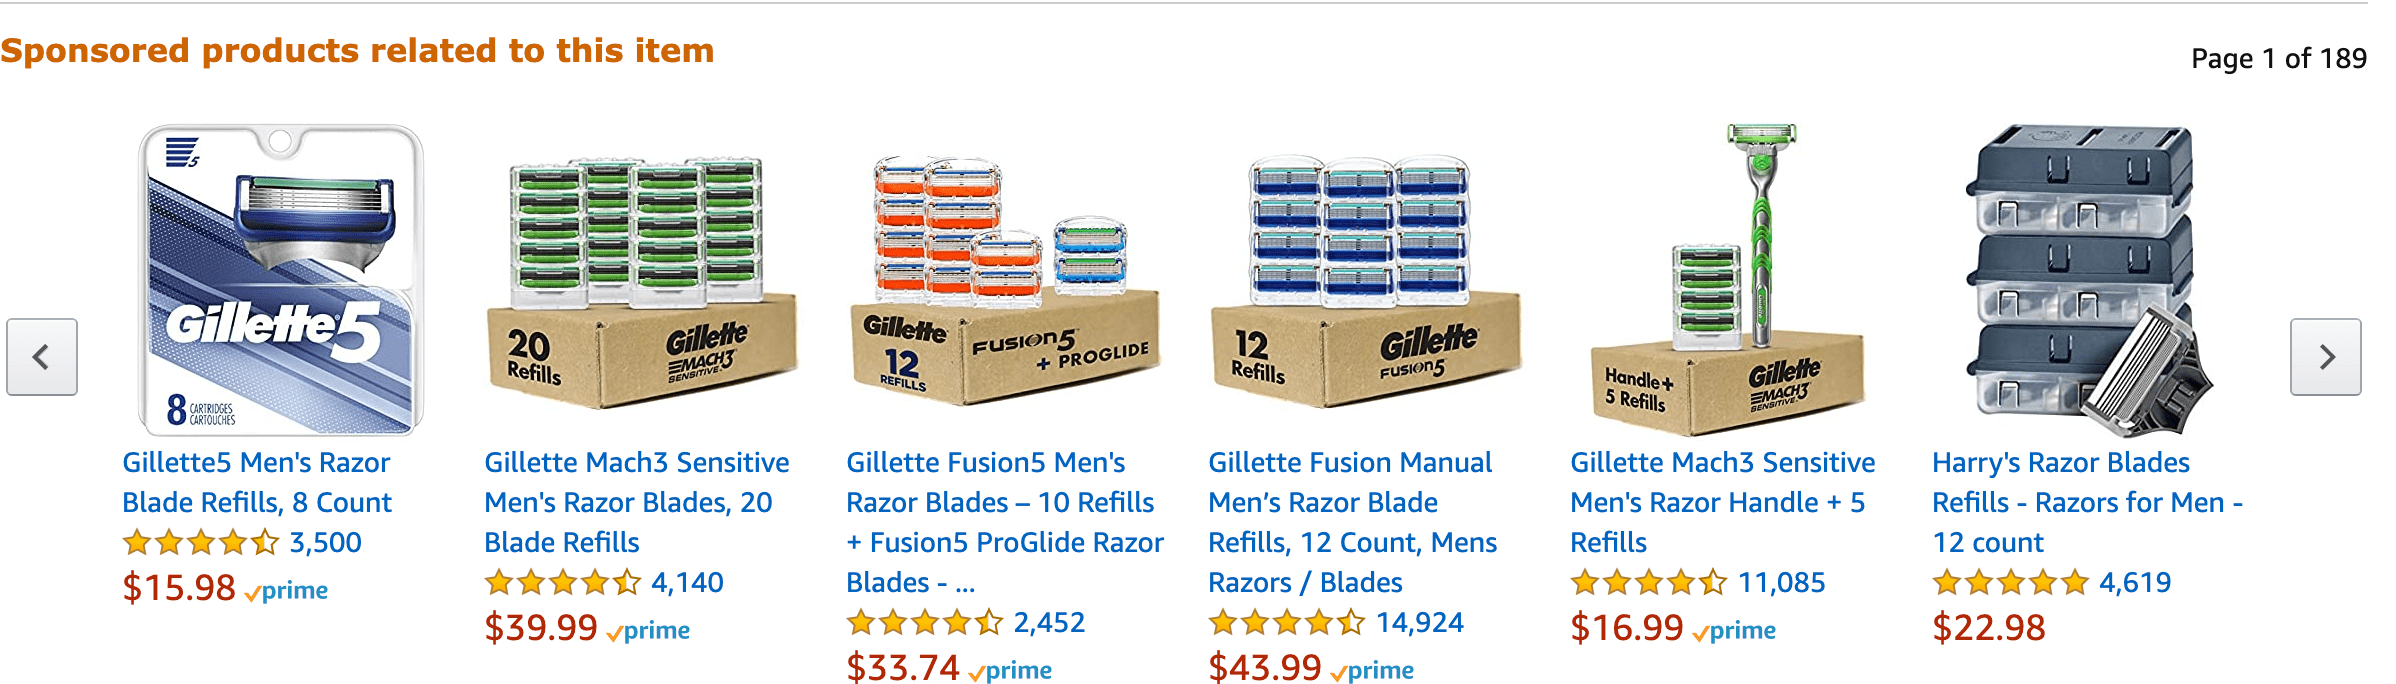 sponsored products related to razors on amazon